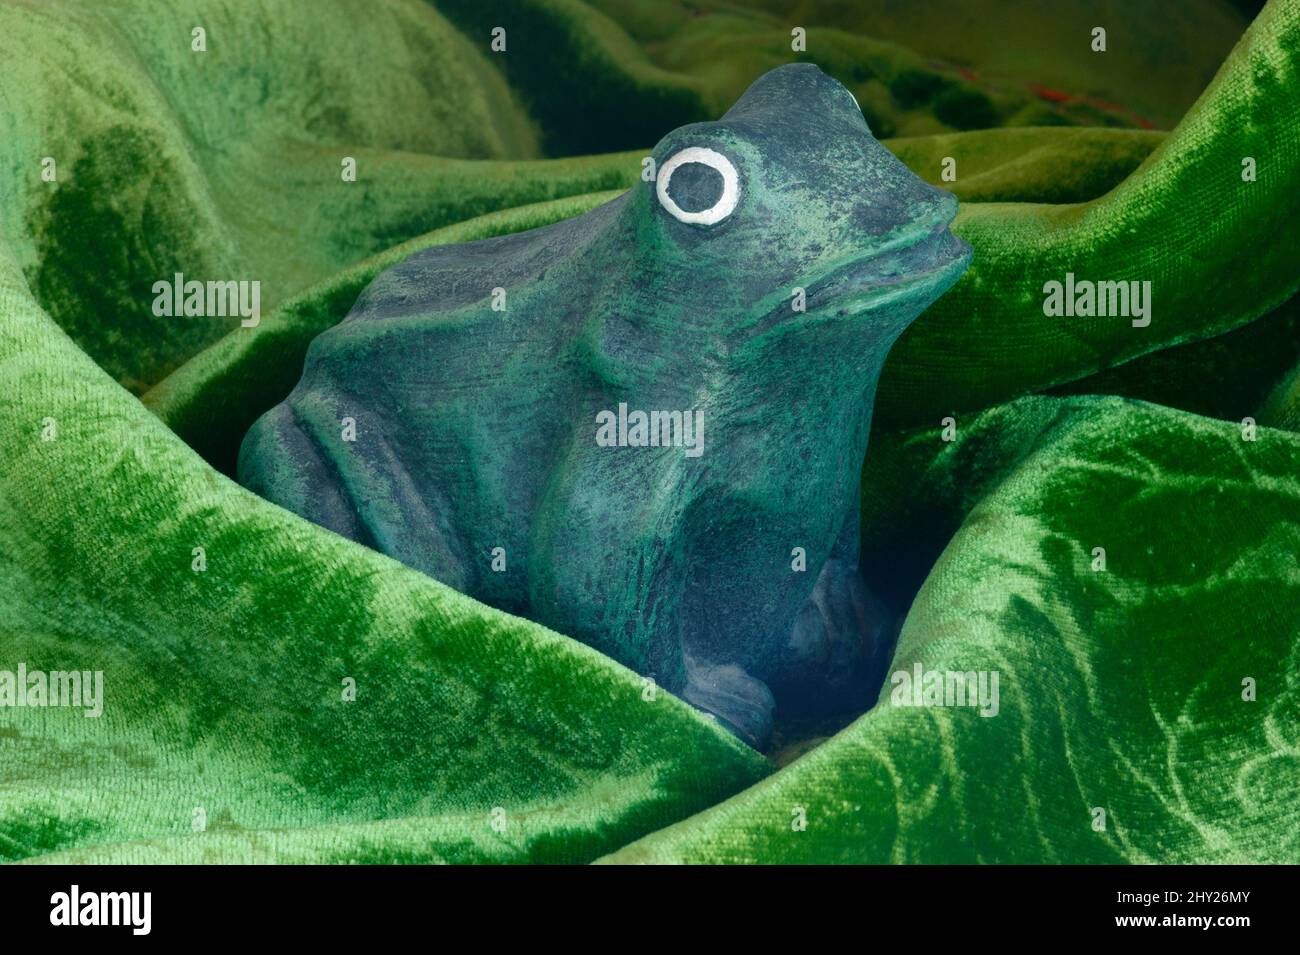 Green frog appears to be emerging from a bog. Storybook, fanciful figure using a cement frog & velvet fabric as the background. Frog has popping eyes. Stock Photo